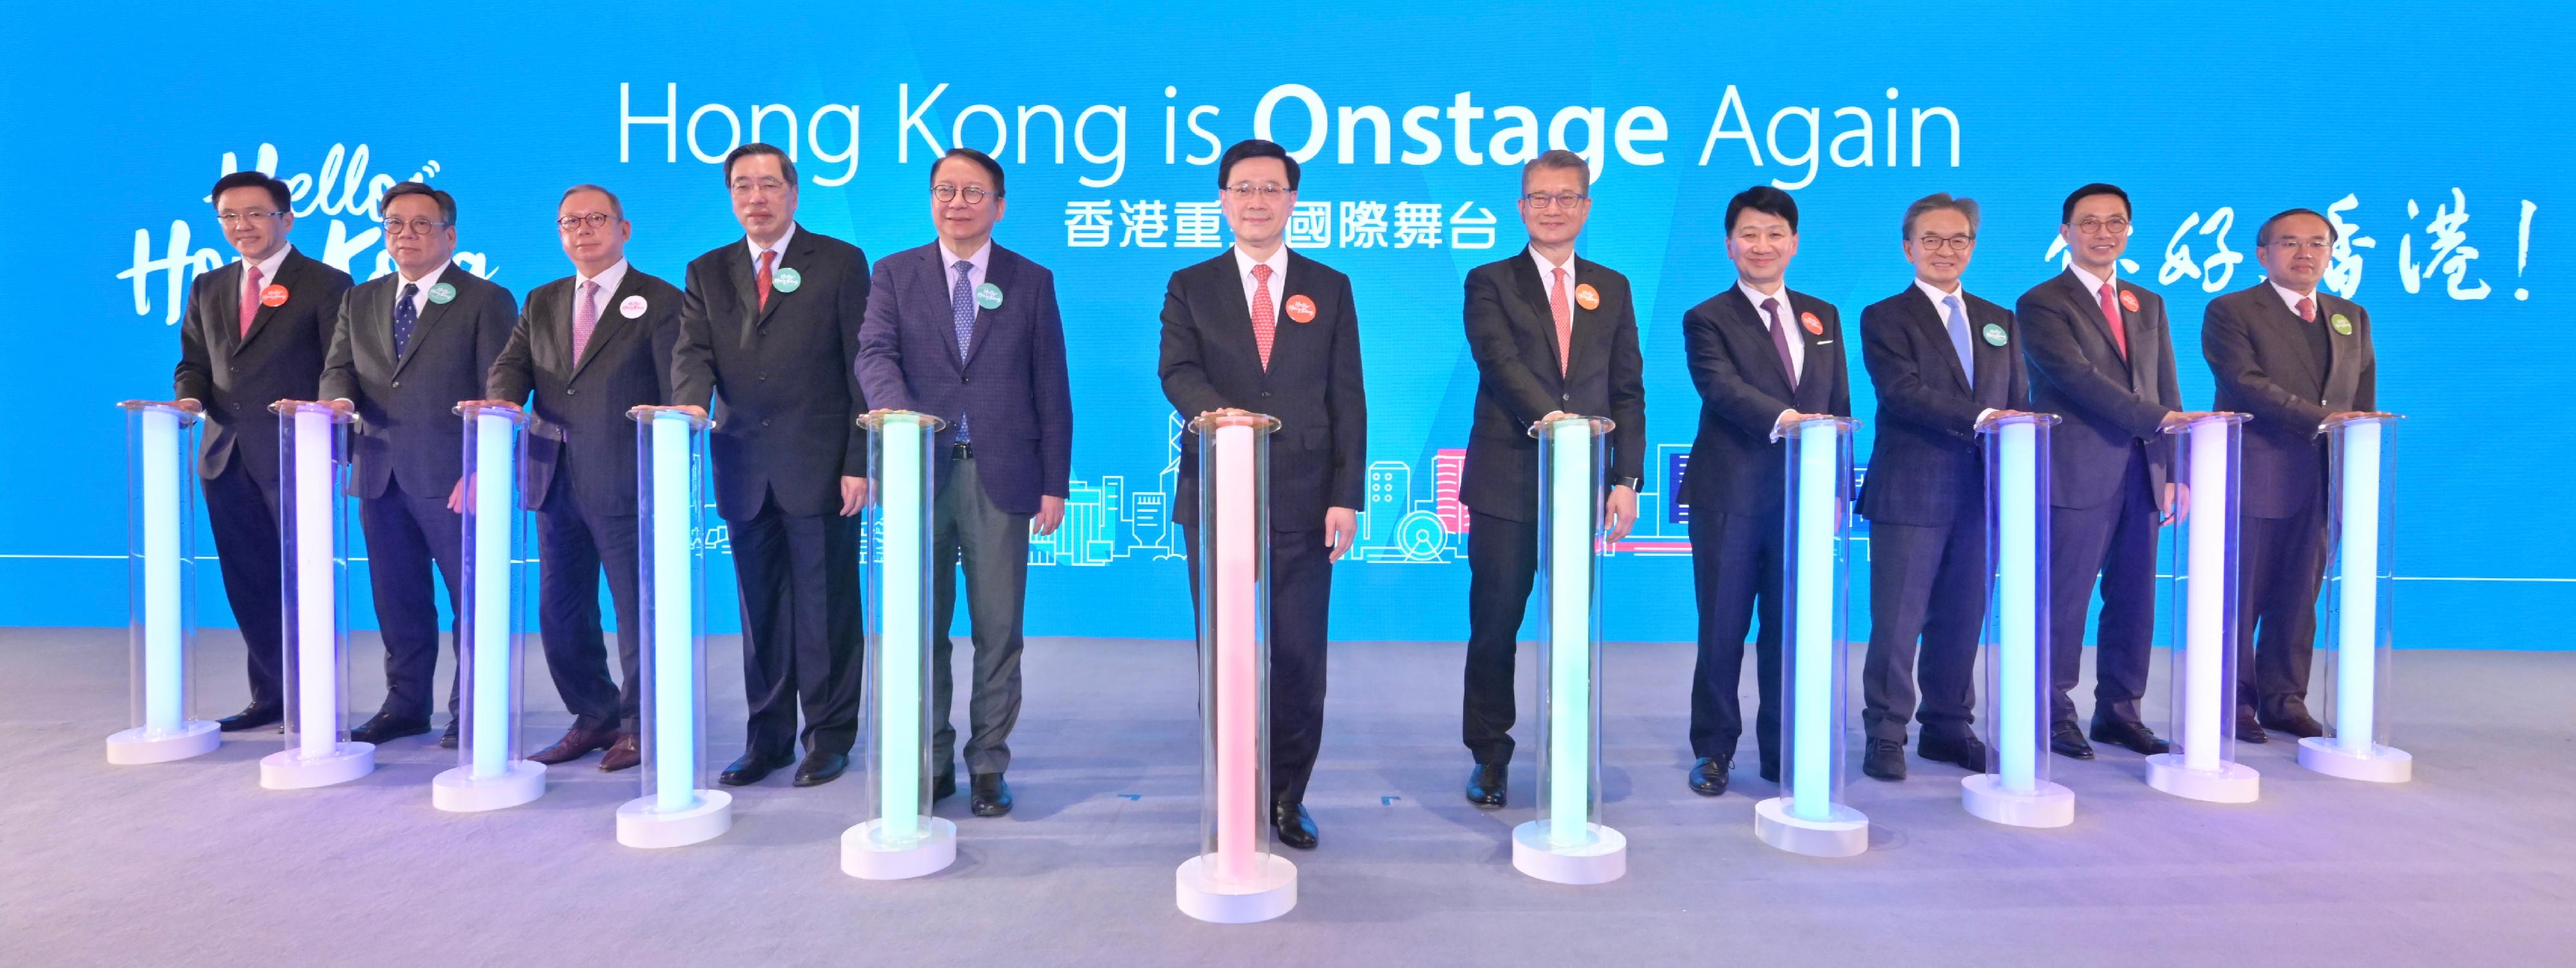 The Chief Executive, Mr John Lee, attended the "Hello Hong Kong" Campaign Launch Ceremony today (February 2). Photo shows (from left) the Secretary for Innovation, Technology and Industry, Professor Sun Dong; the Secretary for Commerce and Economic Development, Mr Algernon Yau; the Chairman of the Hong Kong Trade Development Council, Dr Peter Lam; the President of the Legislative Council, Mr Andrew Leung; the Chief Secretary for Administration, Mr Chan Kwok-ki; Mr Lee; the Financial Secretary, Mr Paul Chan; the Chairman of the Hong Kong Tourism Board, Dr Pang Yiu-kai; the Chairman of the Airport Authority Hong Kong, Mr Jack So; the Secretary for Culture, Sports and Tourism, Mr Kevin Yeung; and the Secretary for Financial Services and the Treasury, Mr Christopher Hui, officiating at the ceremony.